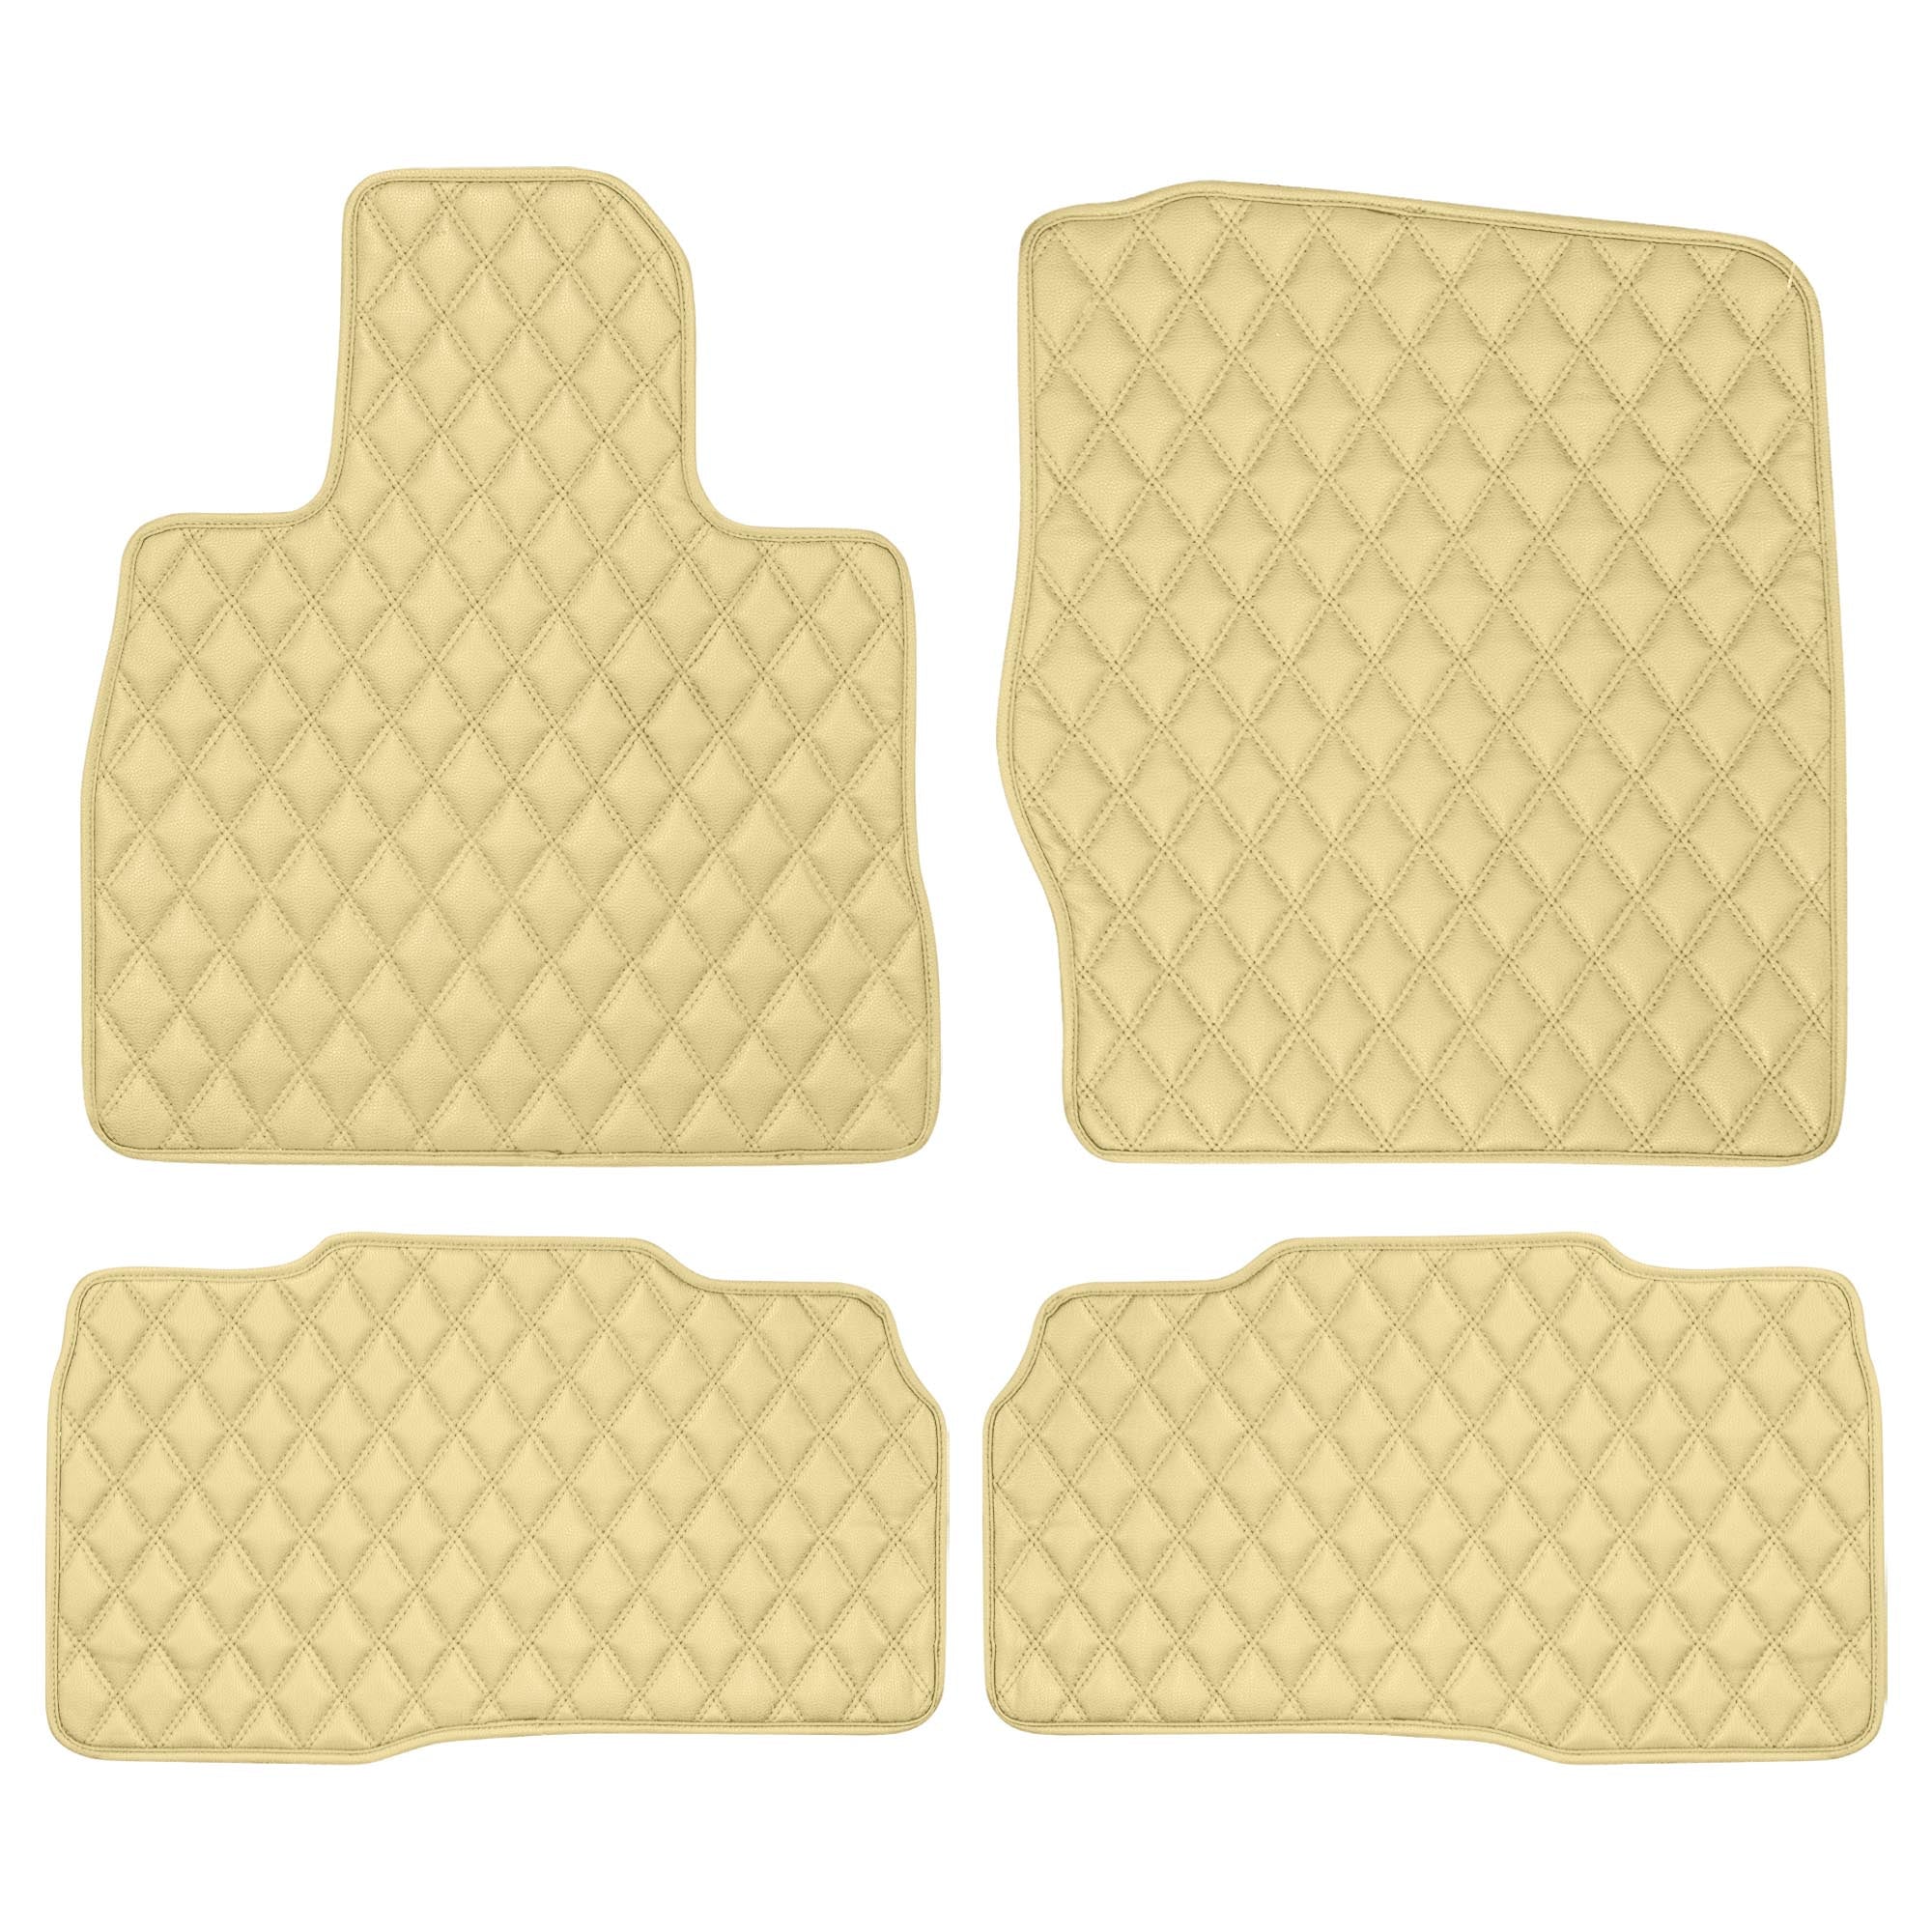 Faux Leather Custom-Fit Floor Mats for 2020-2022 Ford Explorer - Beige